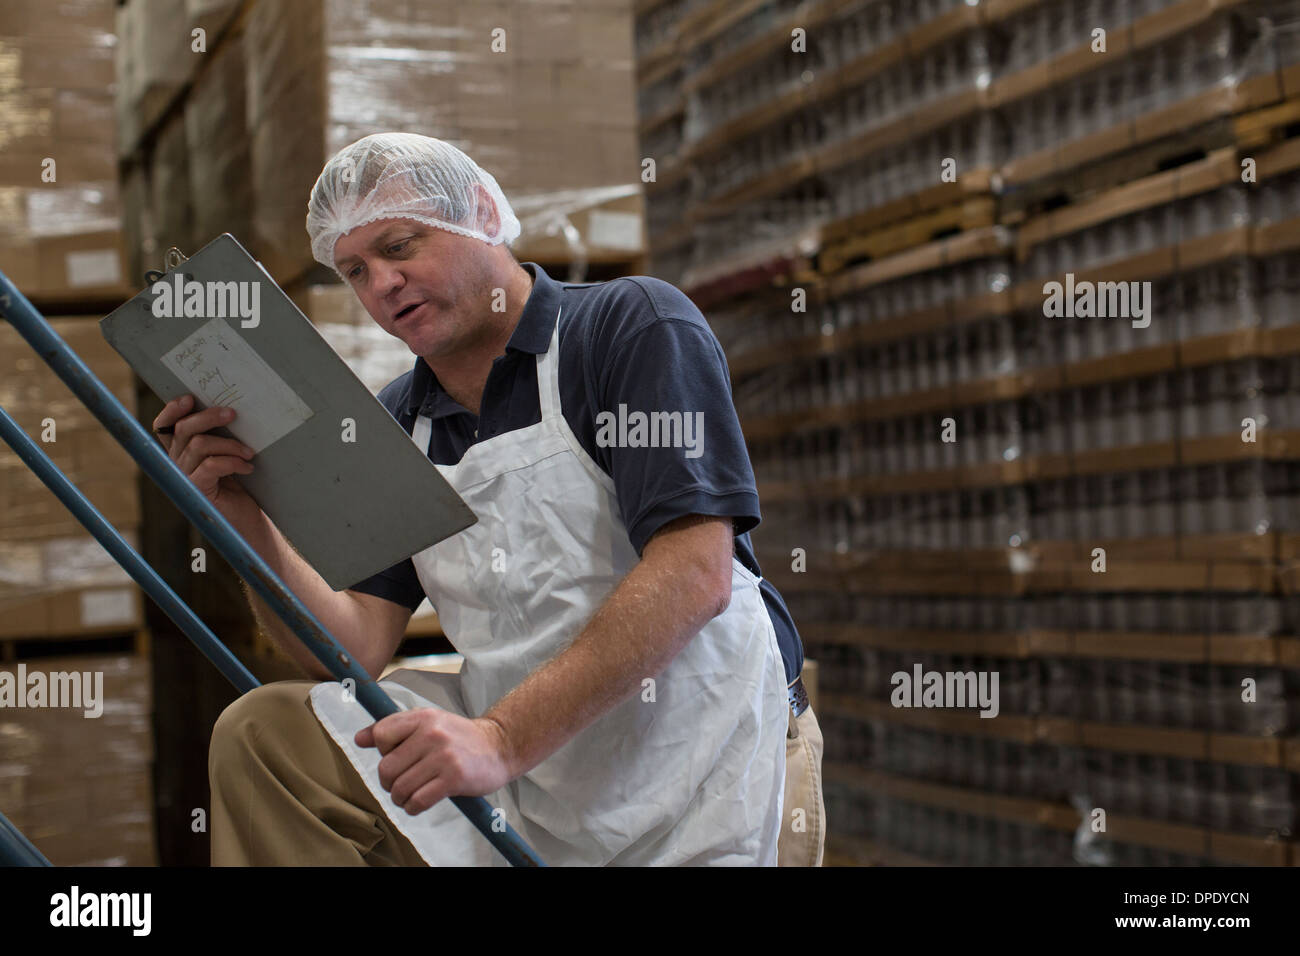 Man holding clipboard in warehouse Stock Photo